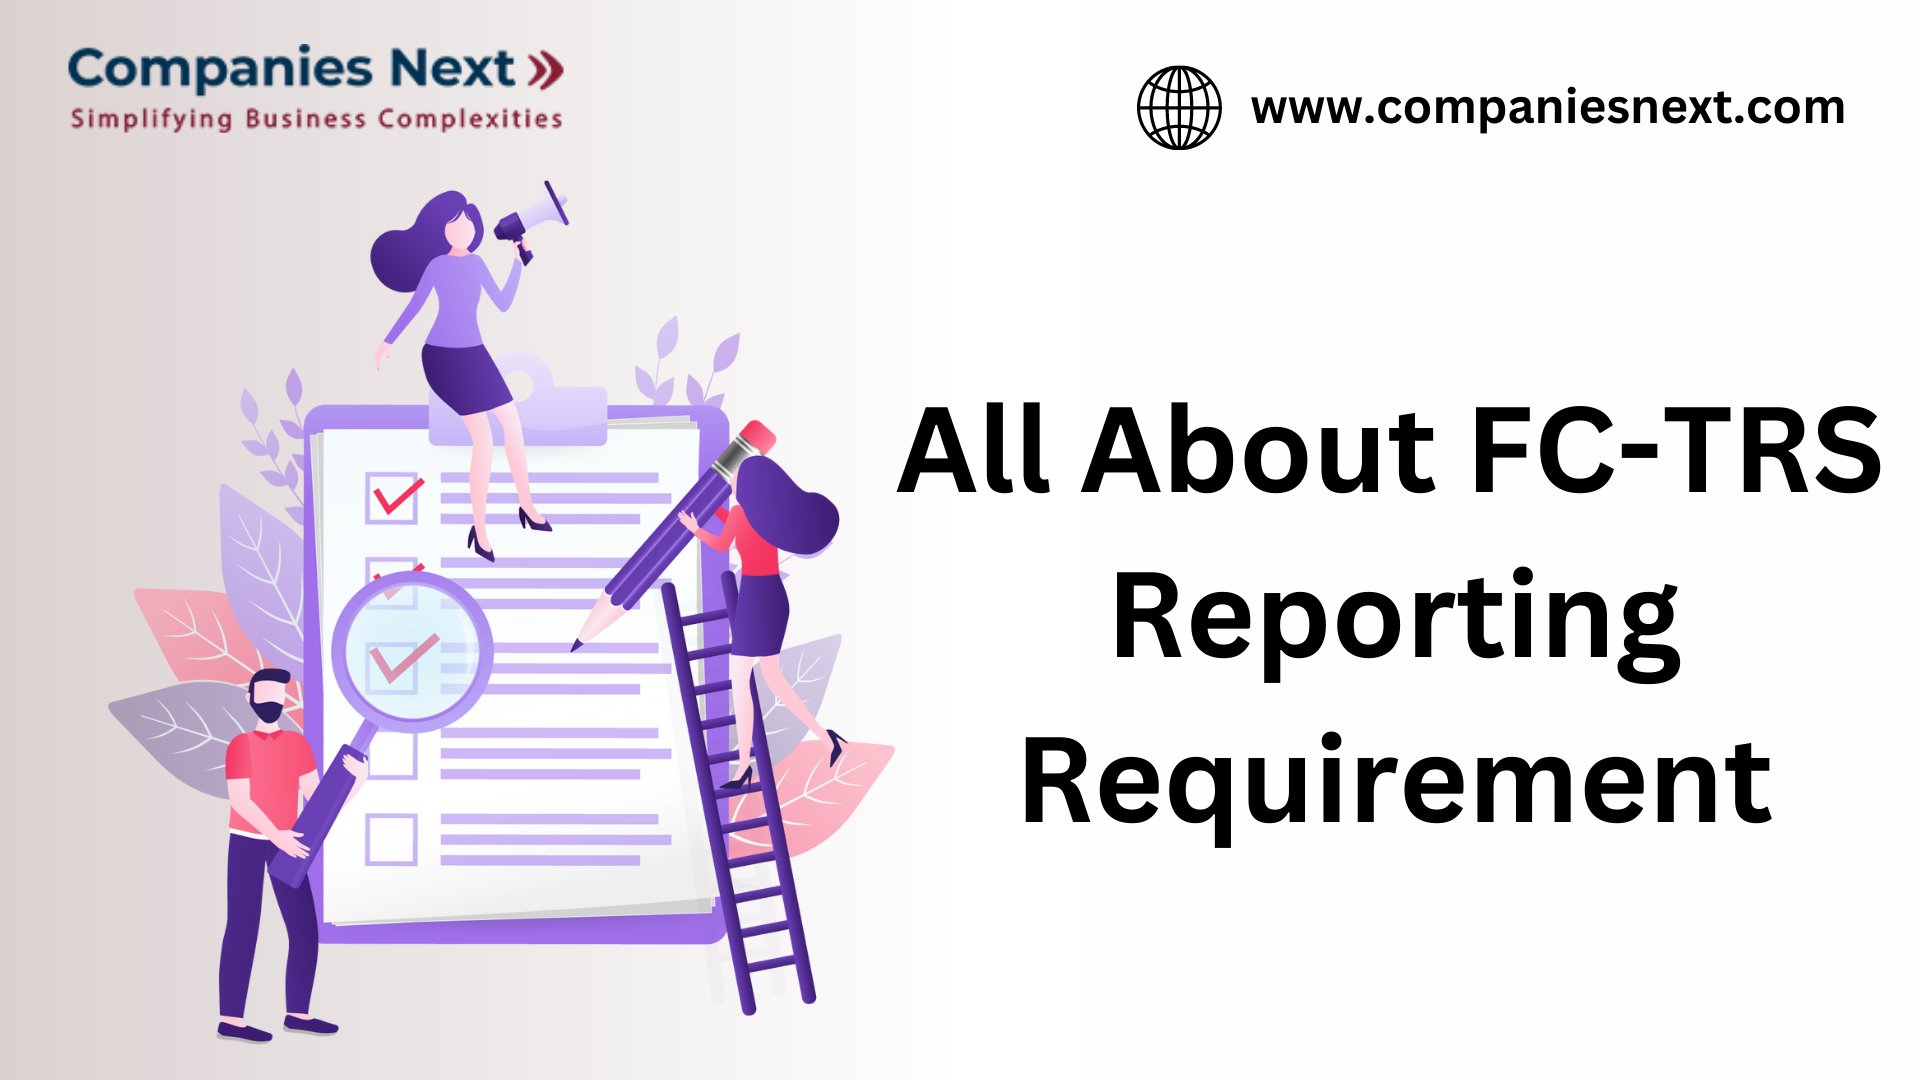 All About FC-TRS Reporting Requirement